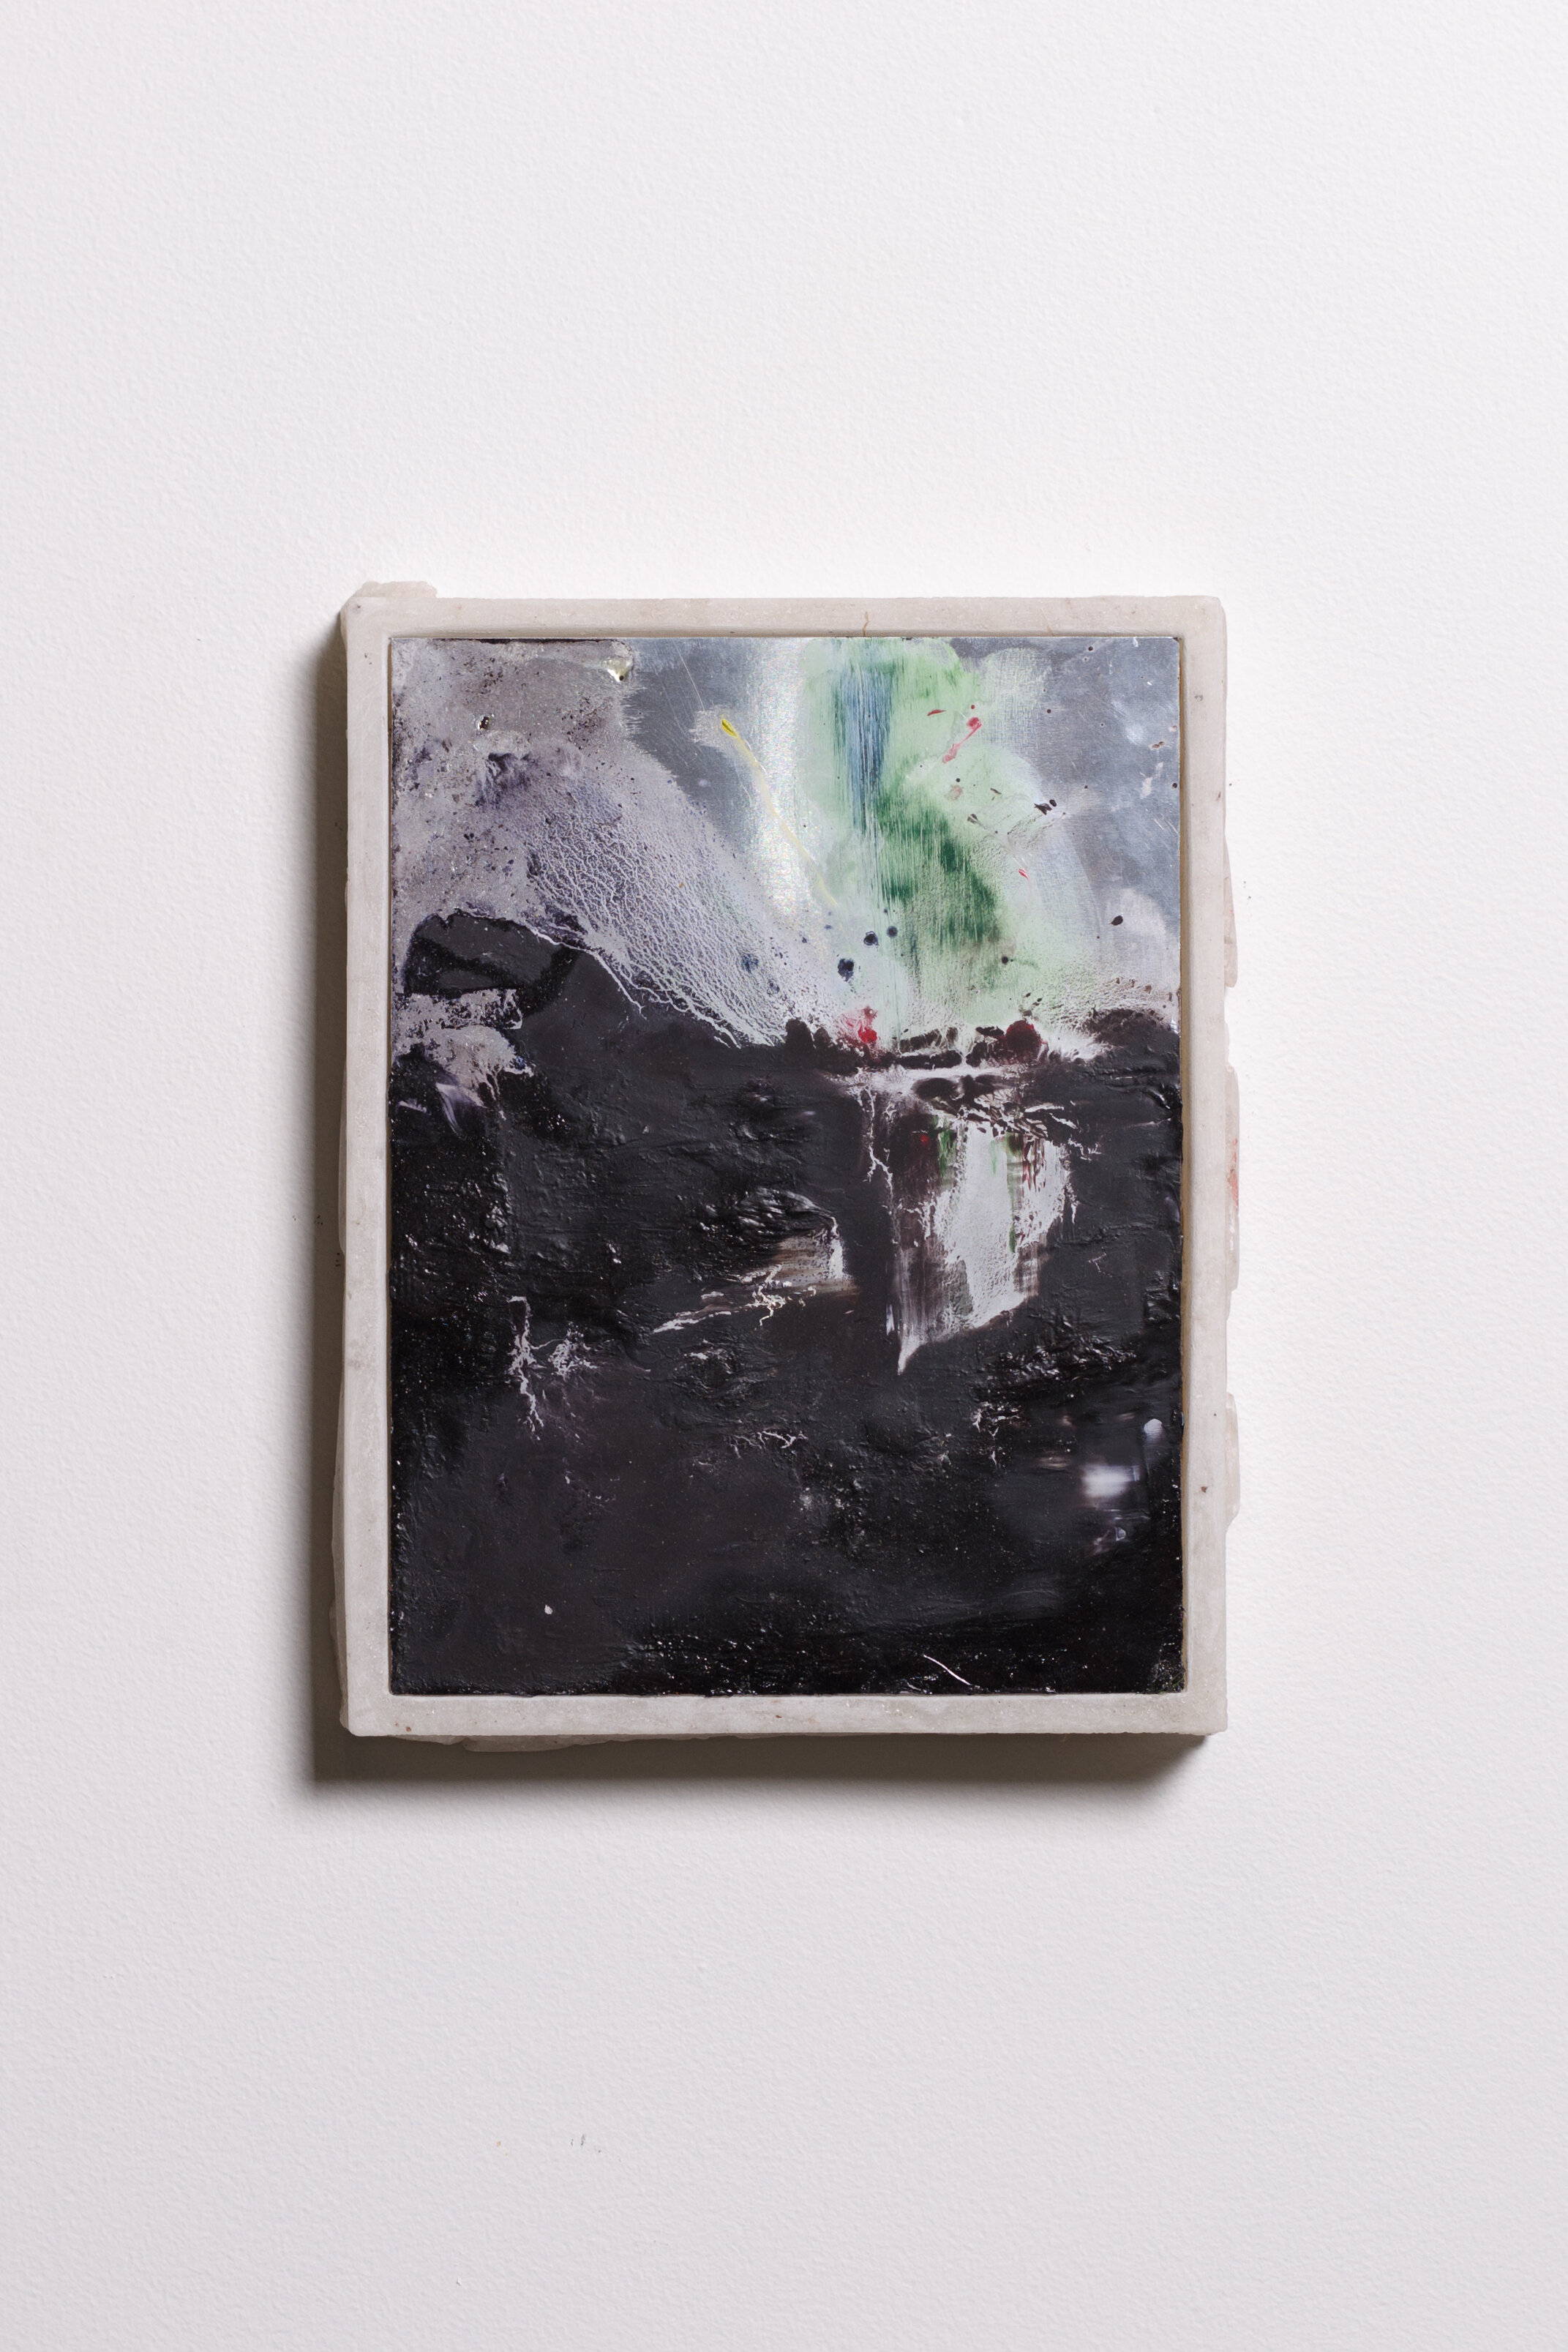   Double Screen,  oil on aluminium, salt and resin frame, 160 x 210mm, 2019  Photo credit: Mitchell Bright 